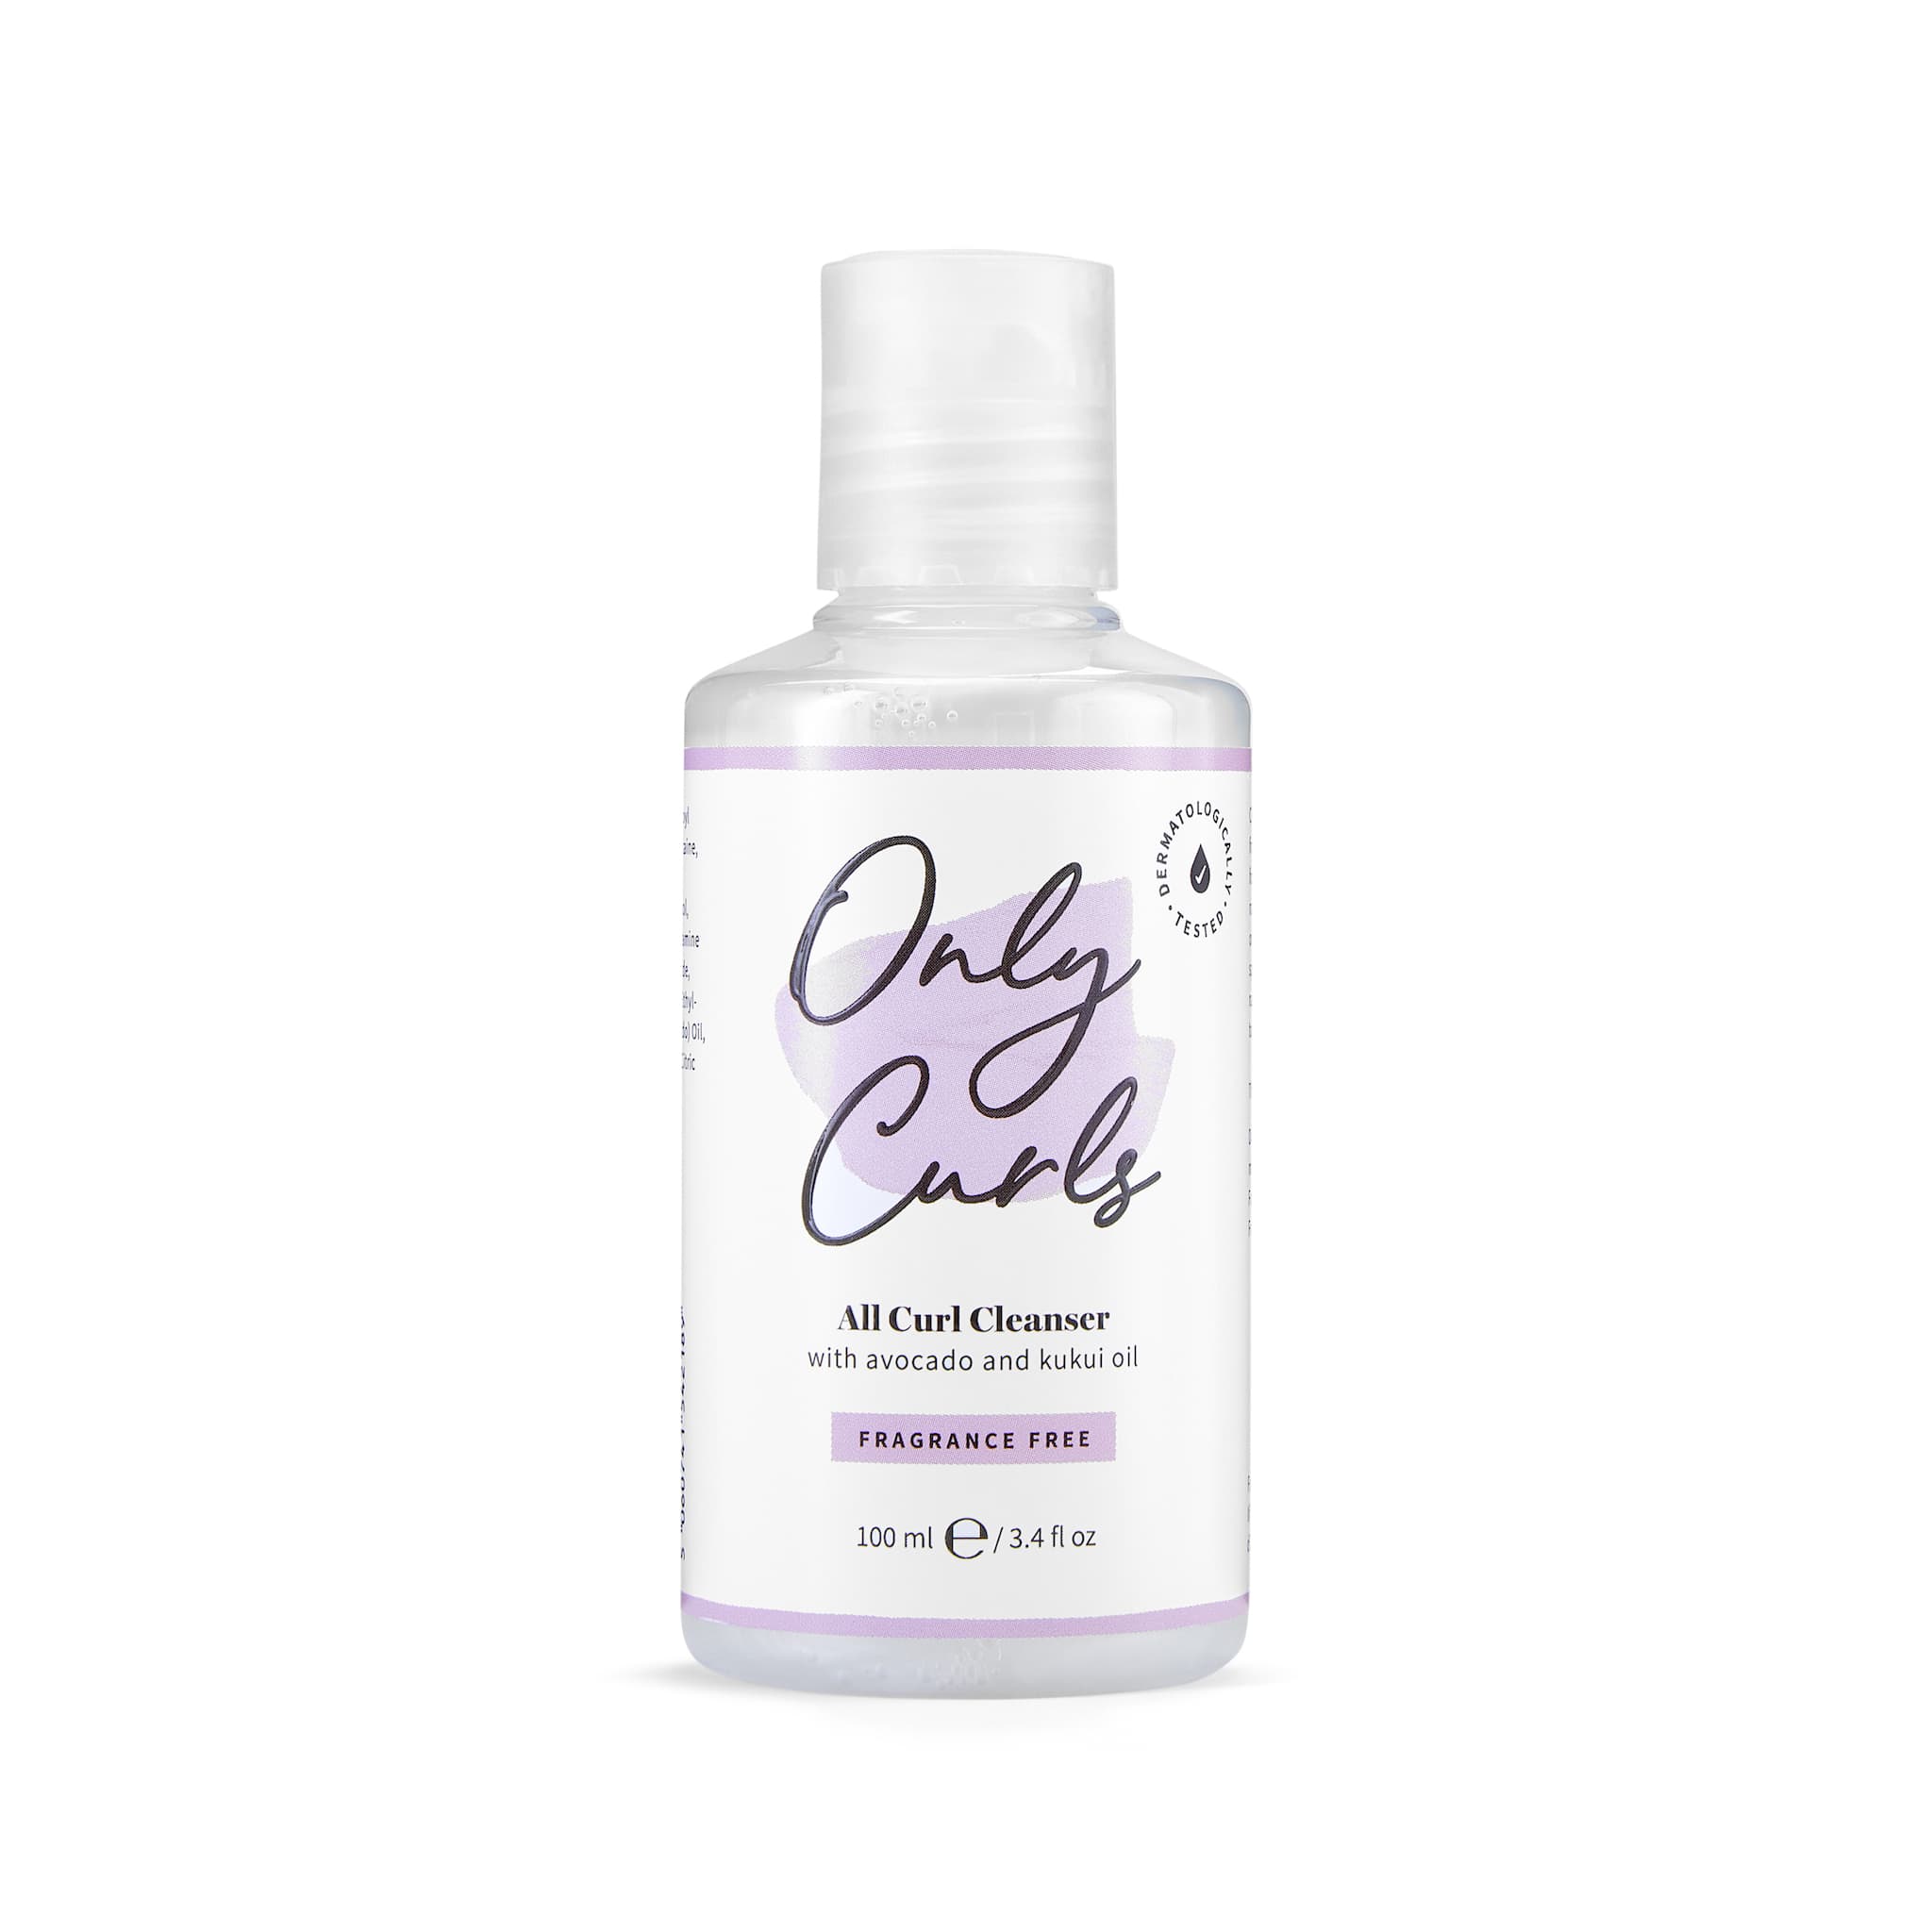 Only Curls All Curl Cleanser, 300ml | Only Curls